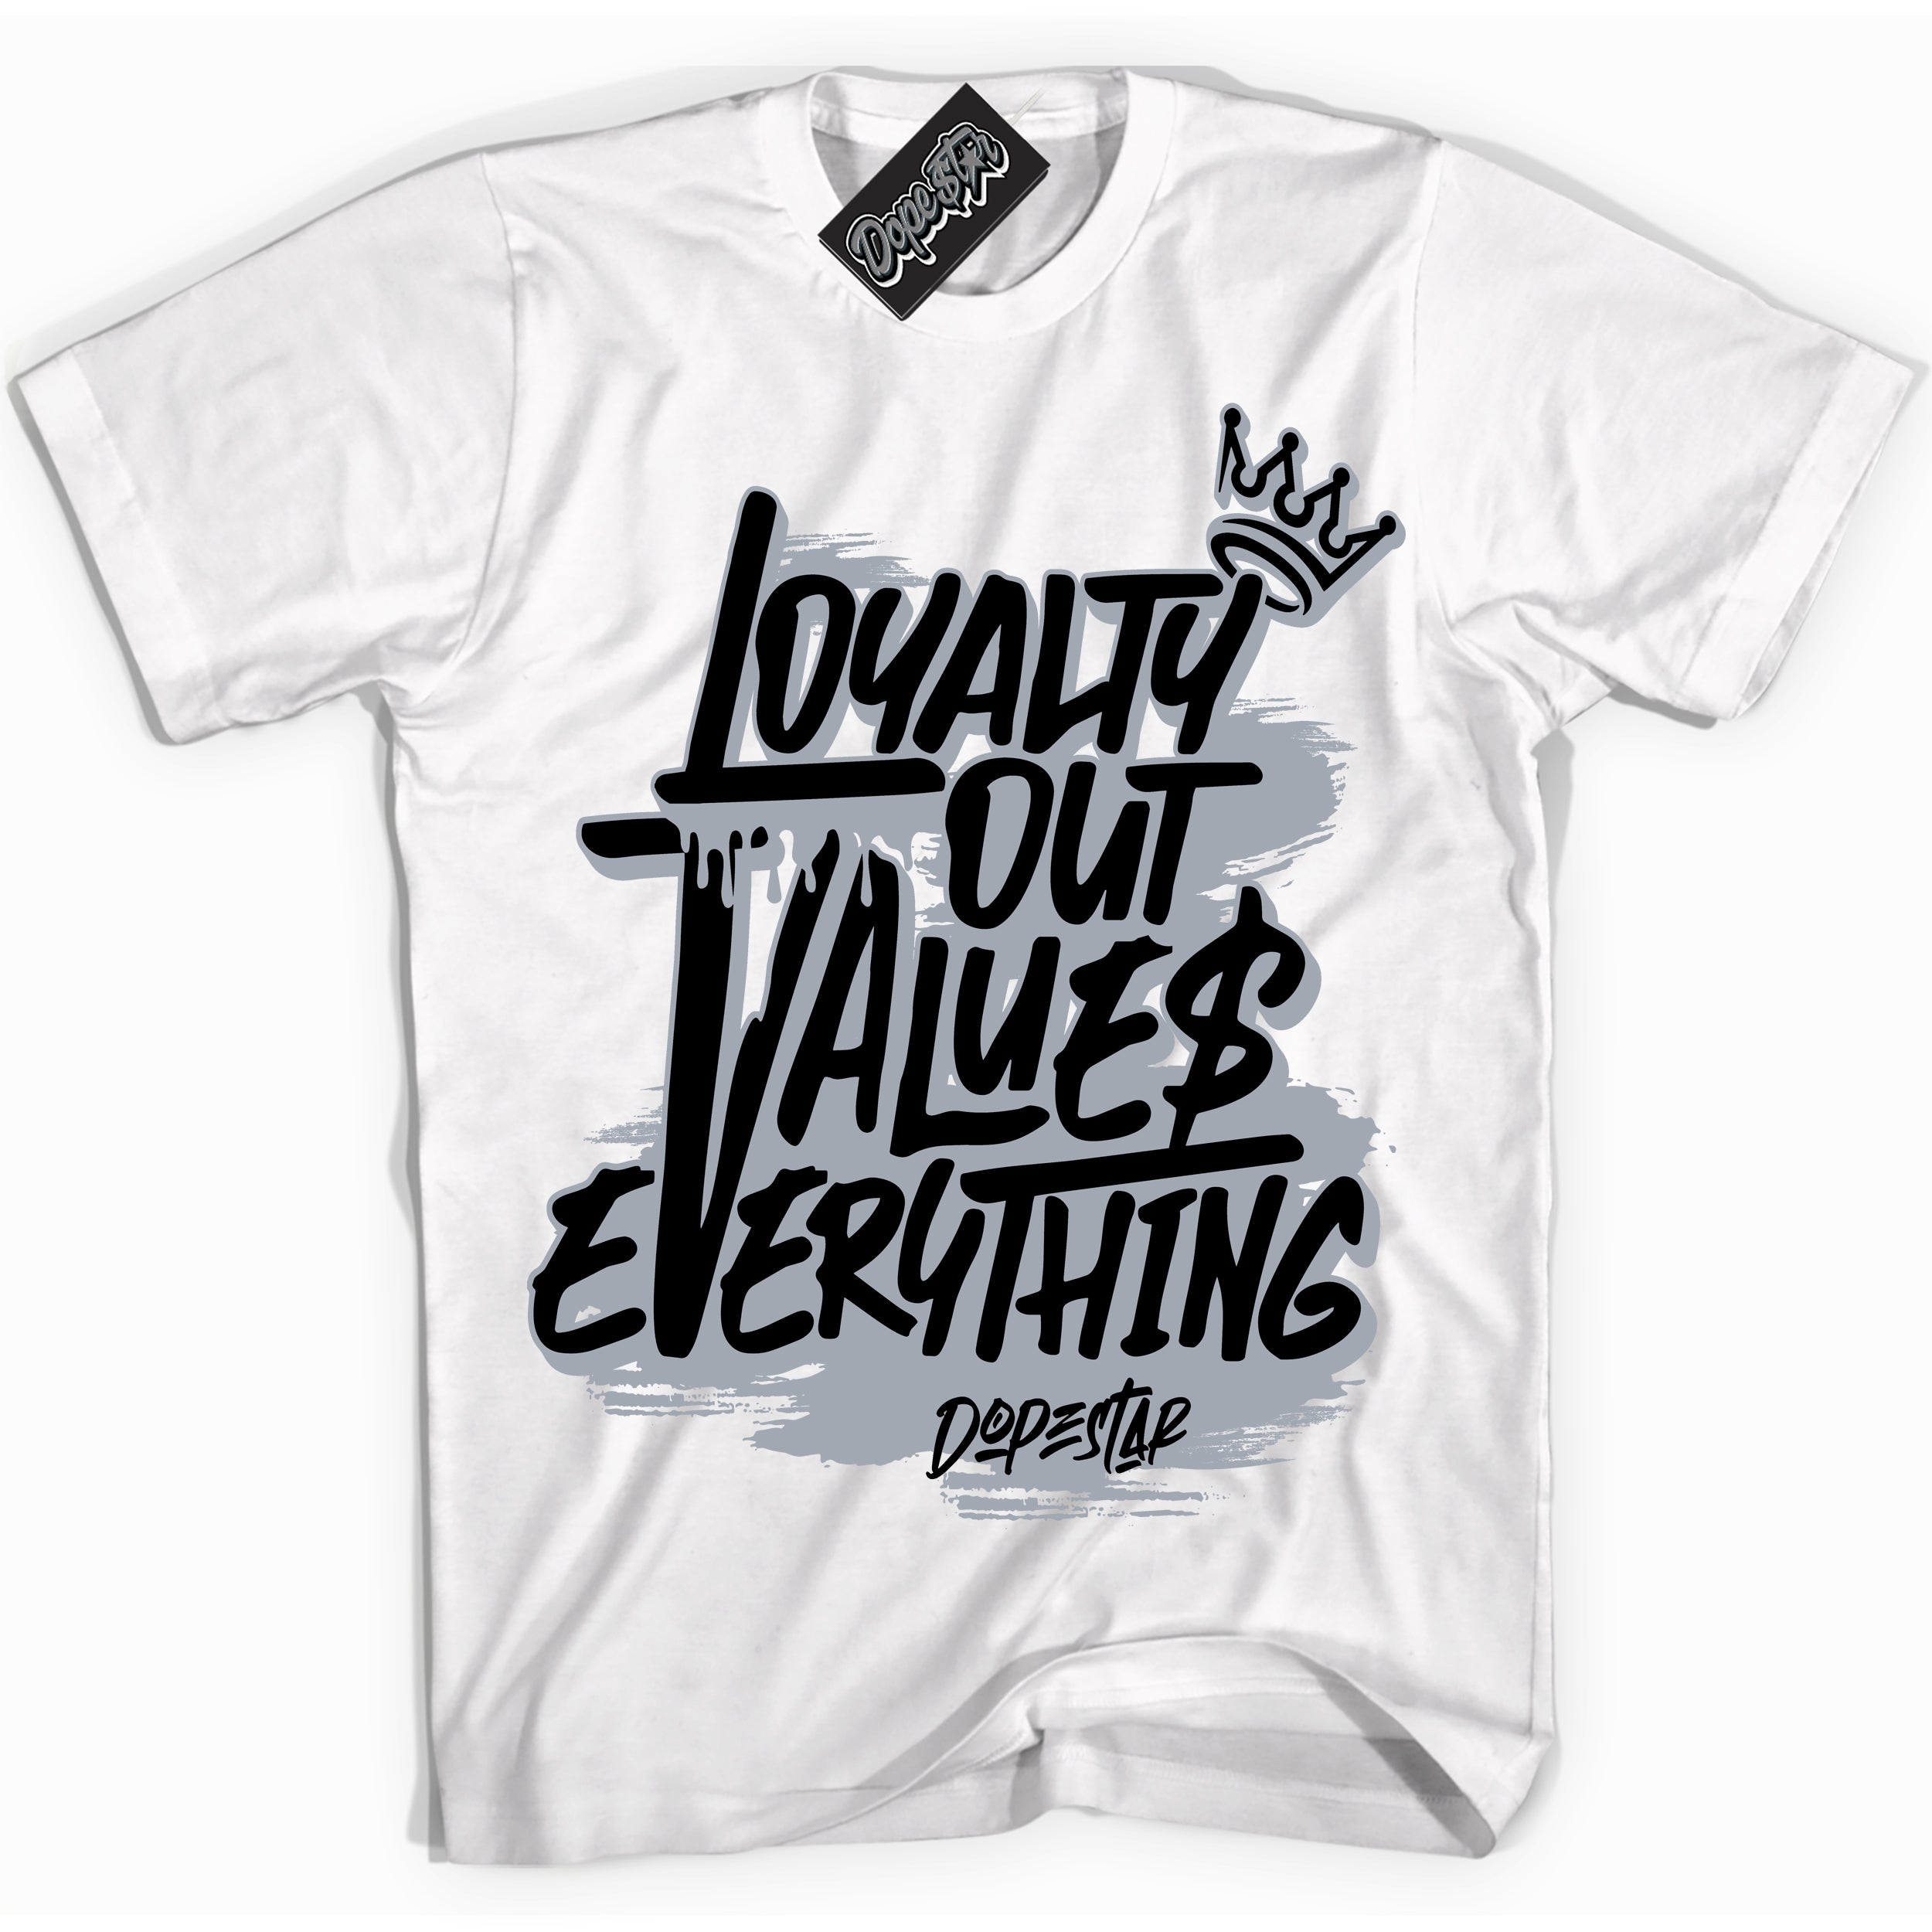 Cool White Shirt with “ Loyalty Out Values Everything” design that perfectly matches The Kaws x Sky High Farm 1s Sneakers.